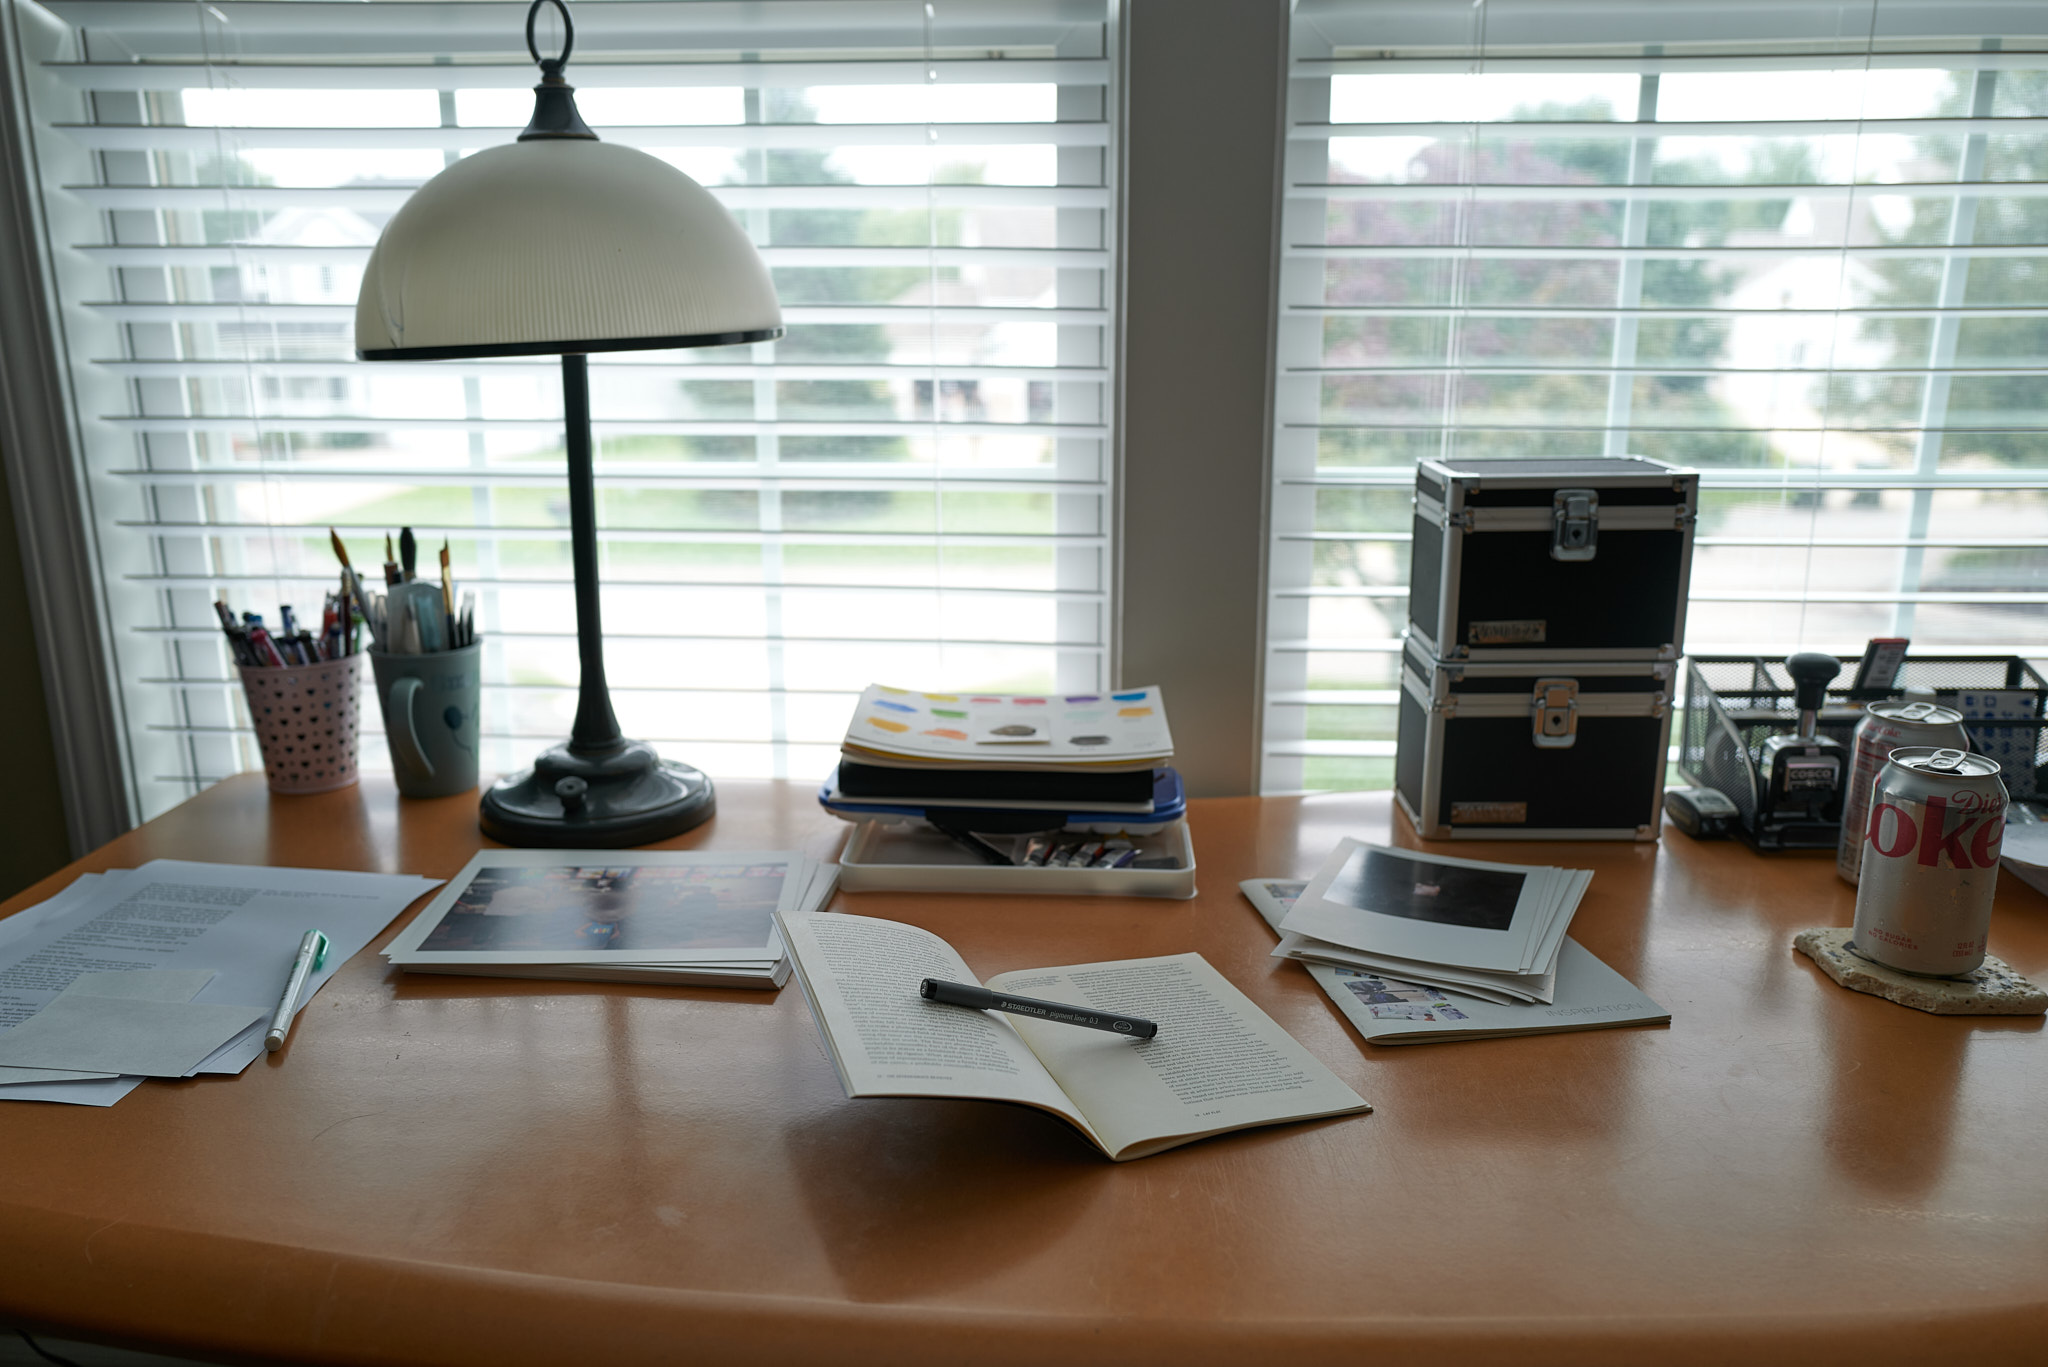 Desk with notebooks and paper tools